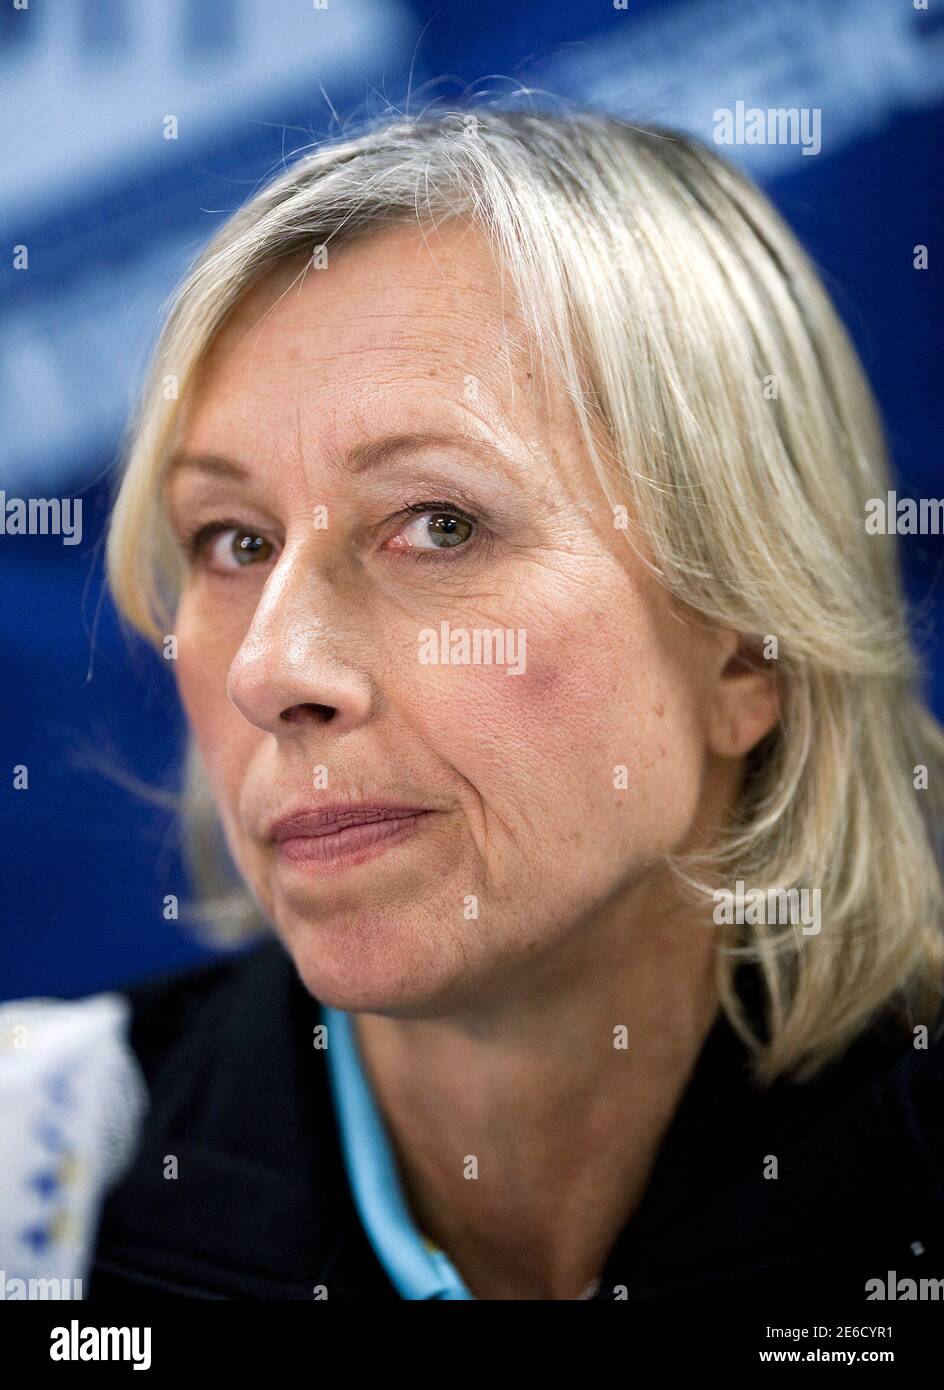 Martina Navratilova attends a news conference for the World Team Tennis Smash Hits fundraiser in Washington November 15, 2010. The event will raise money for the Elton John AIDS Foundation and local Washington, D.C. Area AIDS charities, according to the World Team Tennis website.  REUTERS/Joshua Roberts (UNITED STATES Stock Photo